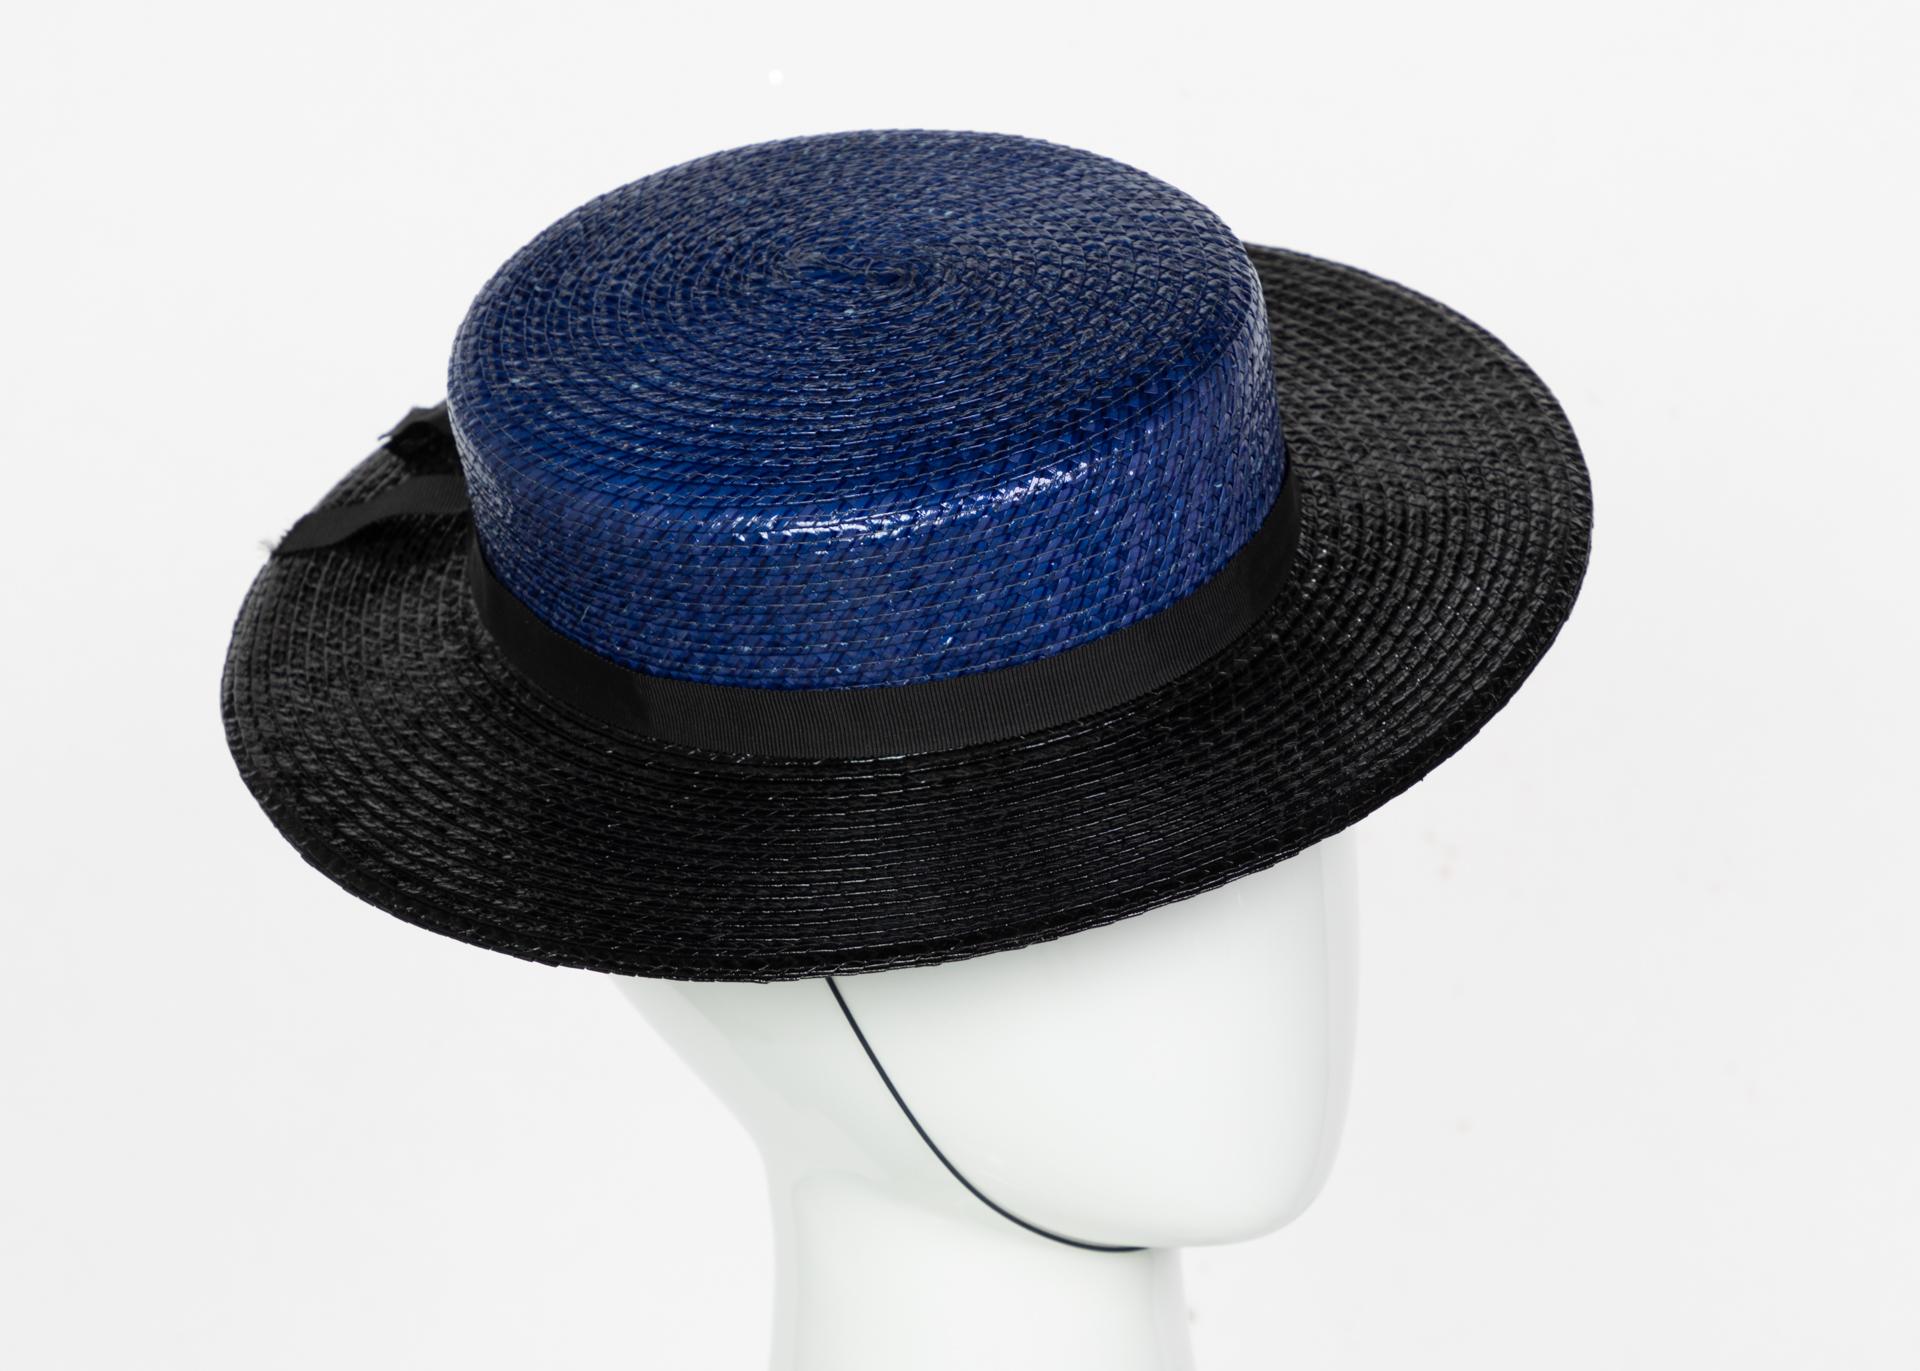 Yves Saint Laurent YSL Vintage Glossy Blue and Black Straw Hat, 1990s In Excellent Condition For Sale In Boca Raton, FL